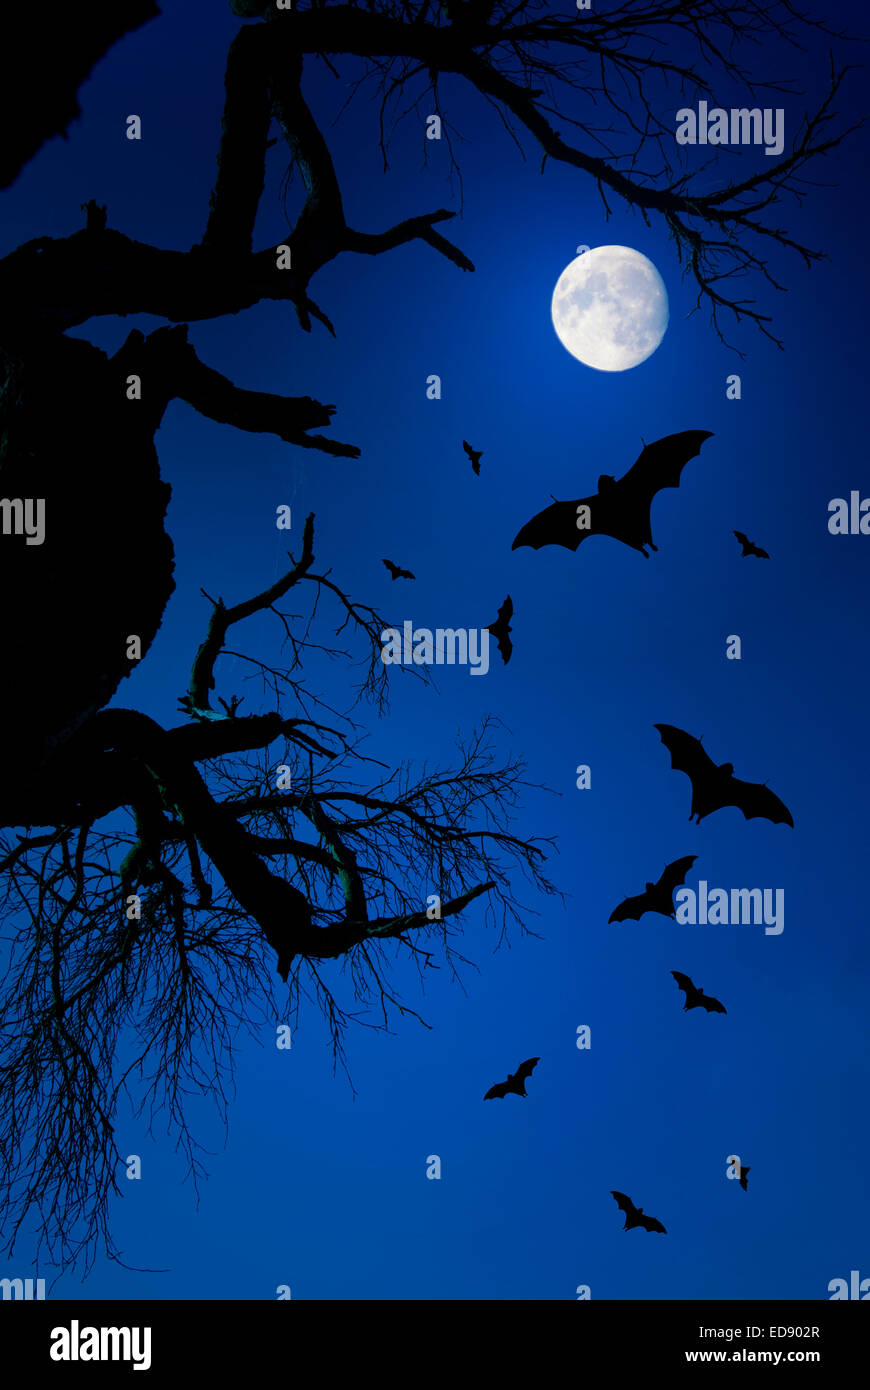 dramatic night scene with dead tree, rising moon and flying bats in silhouette Stock Photo